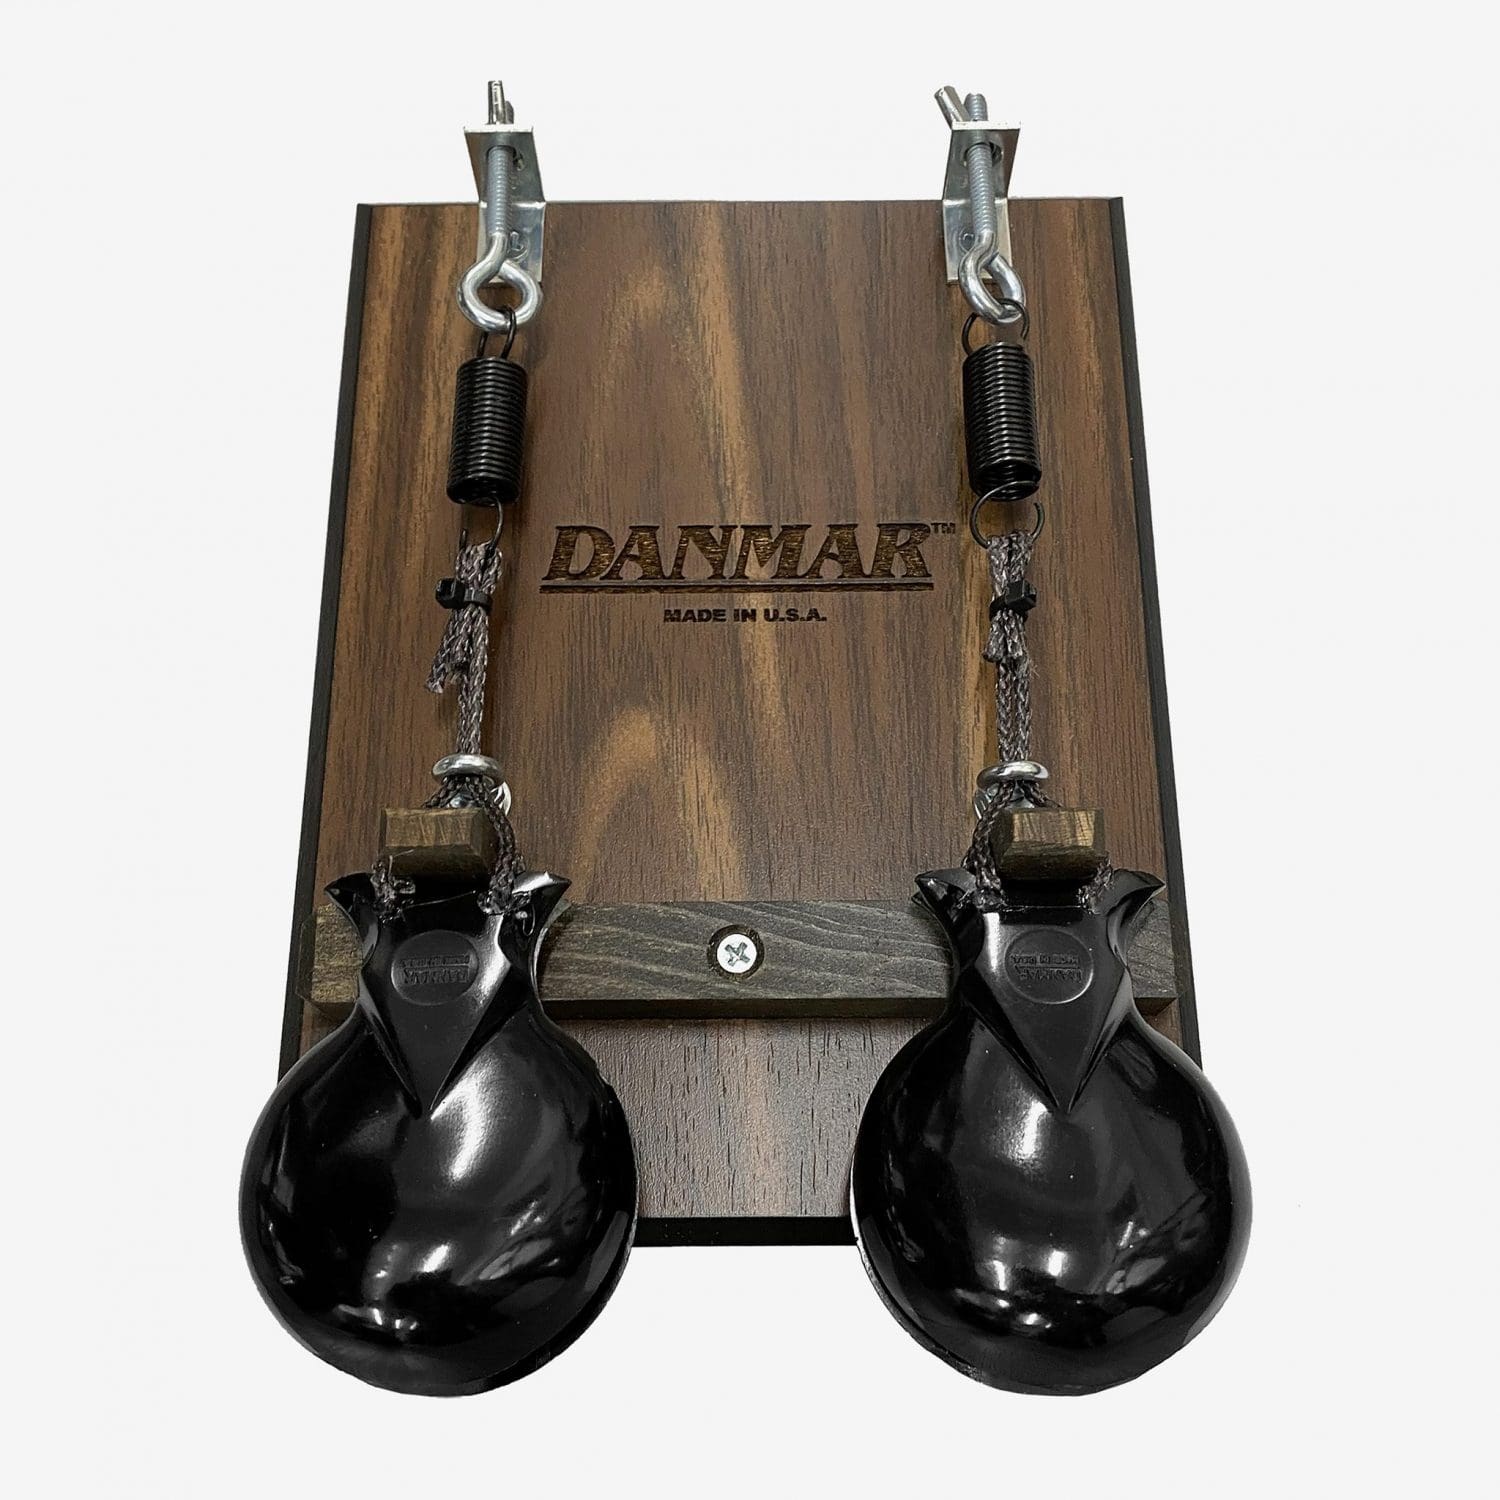 Table Mounted Castanet Instrument